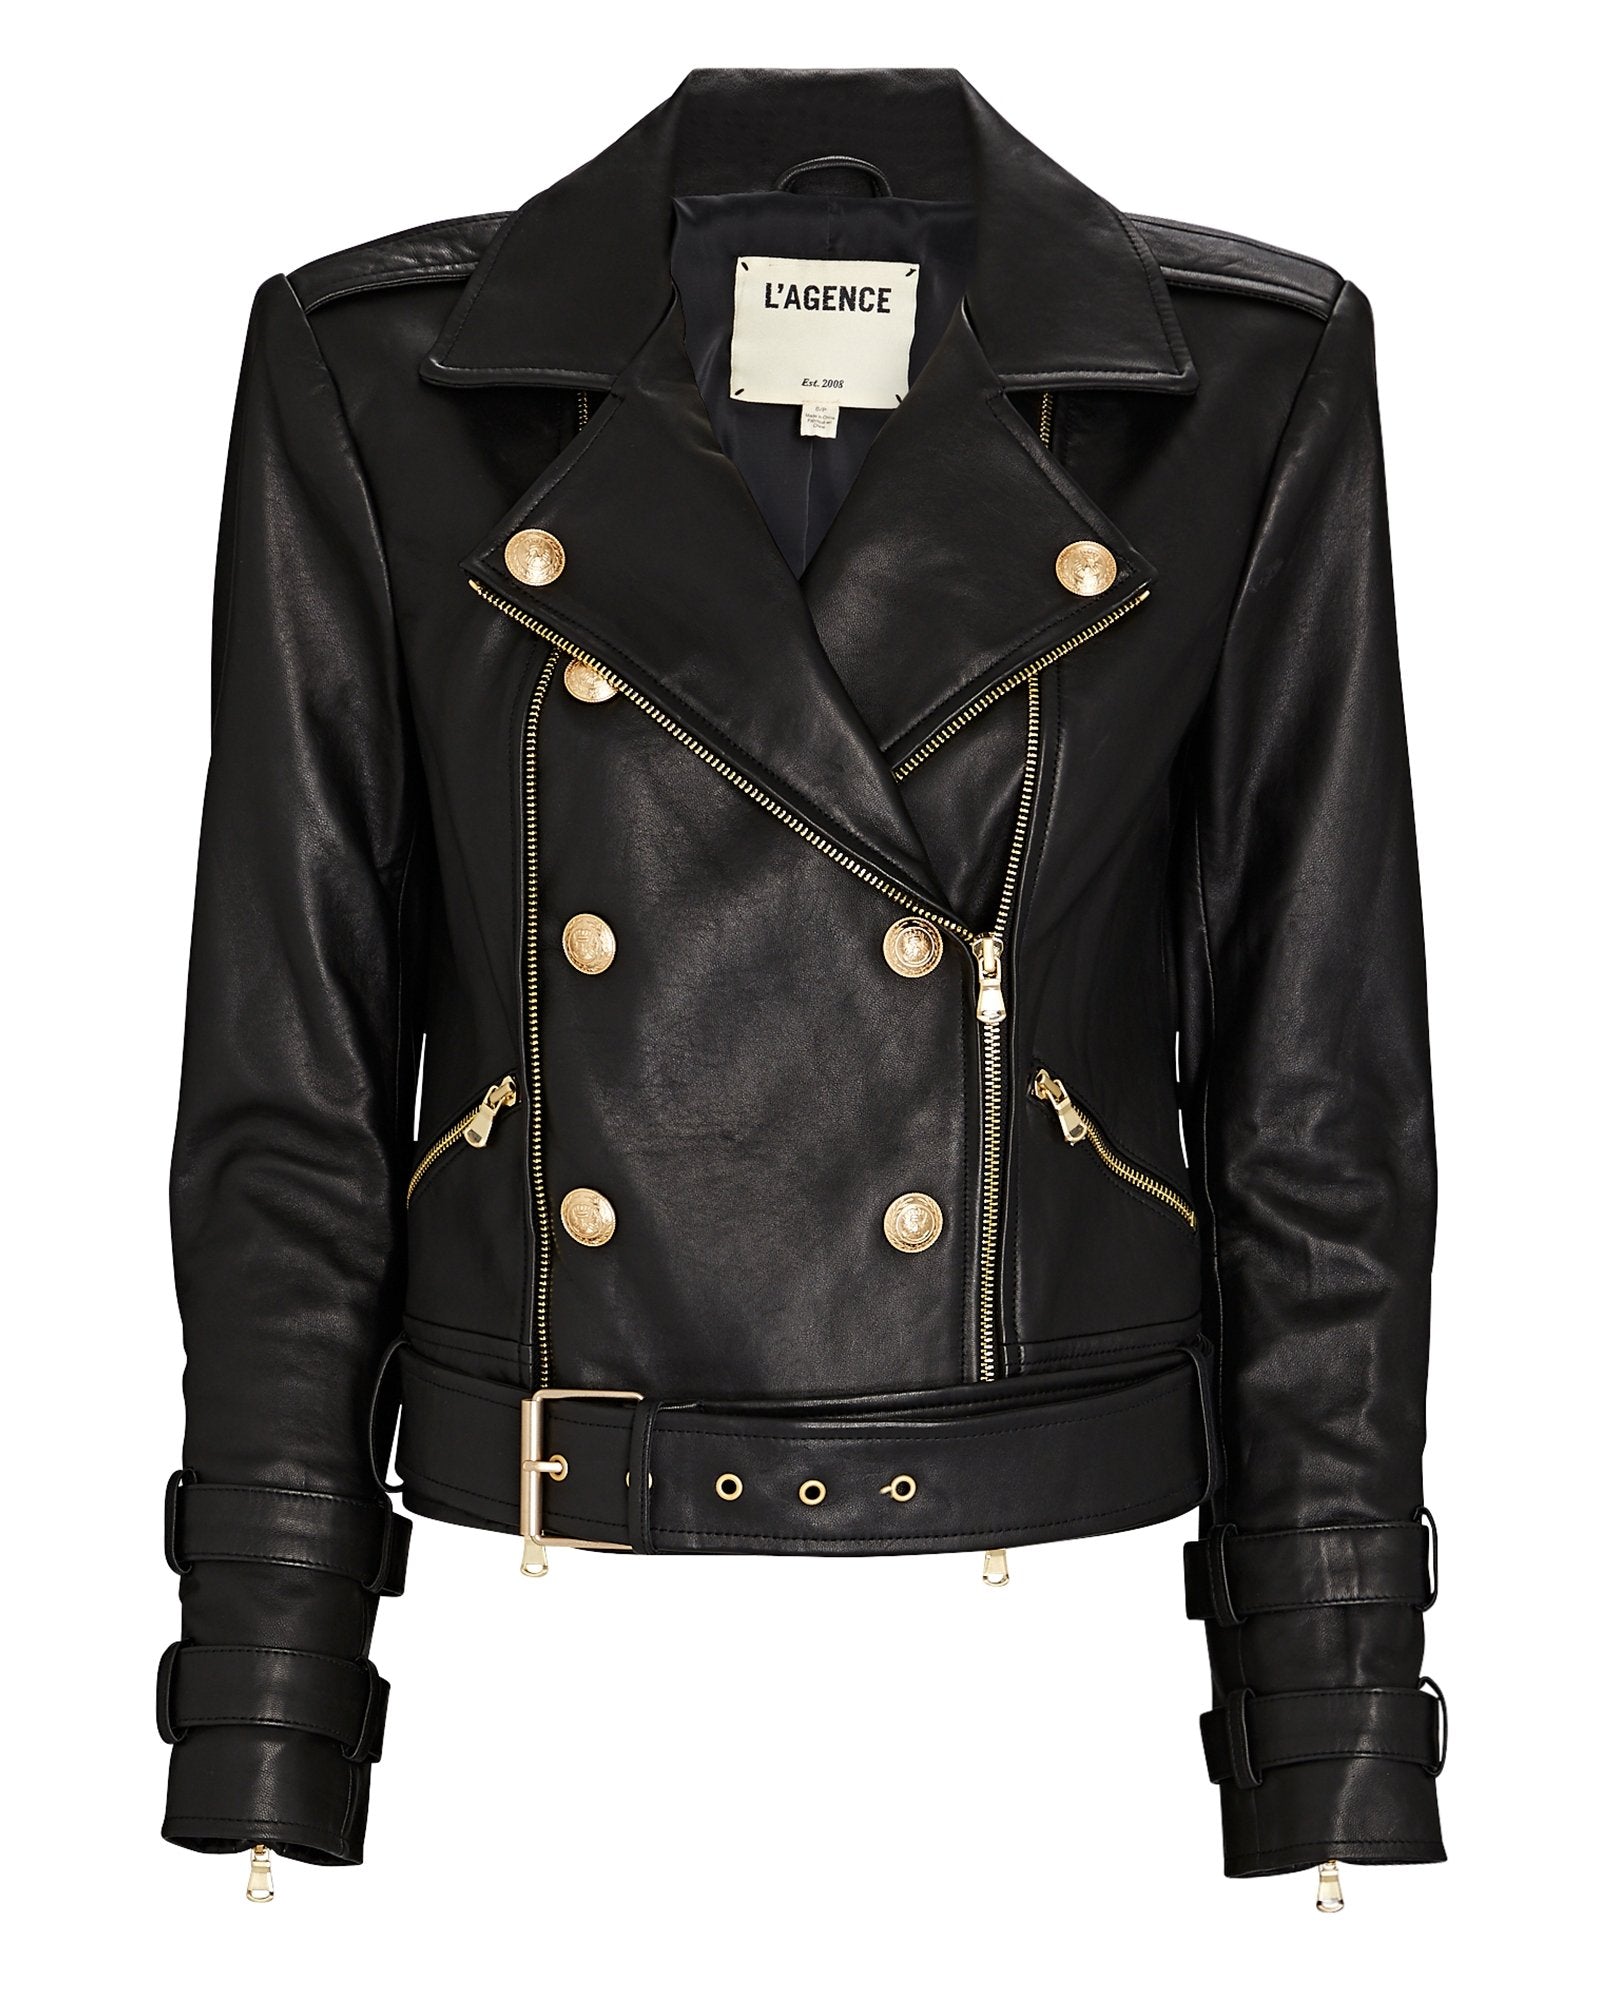 L AGENCE L'agence Billie Double-Breasted Leather Jacket